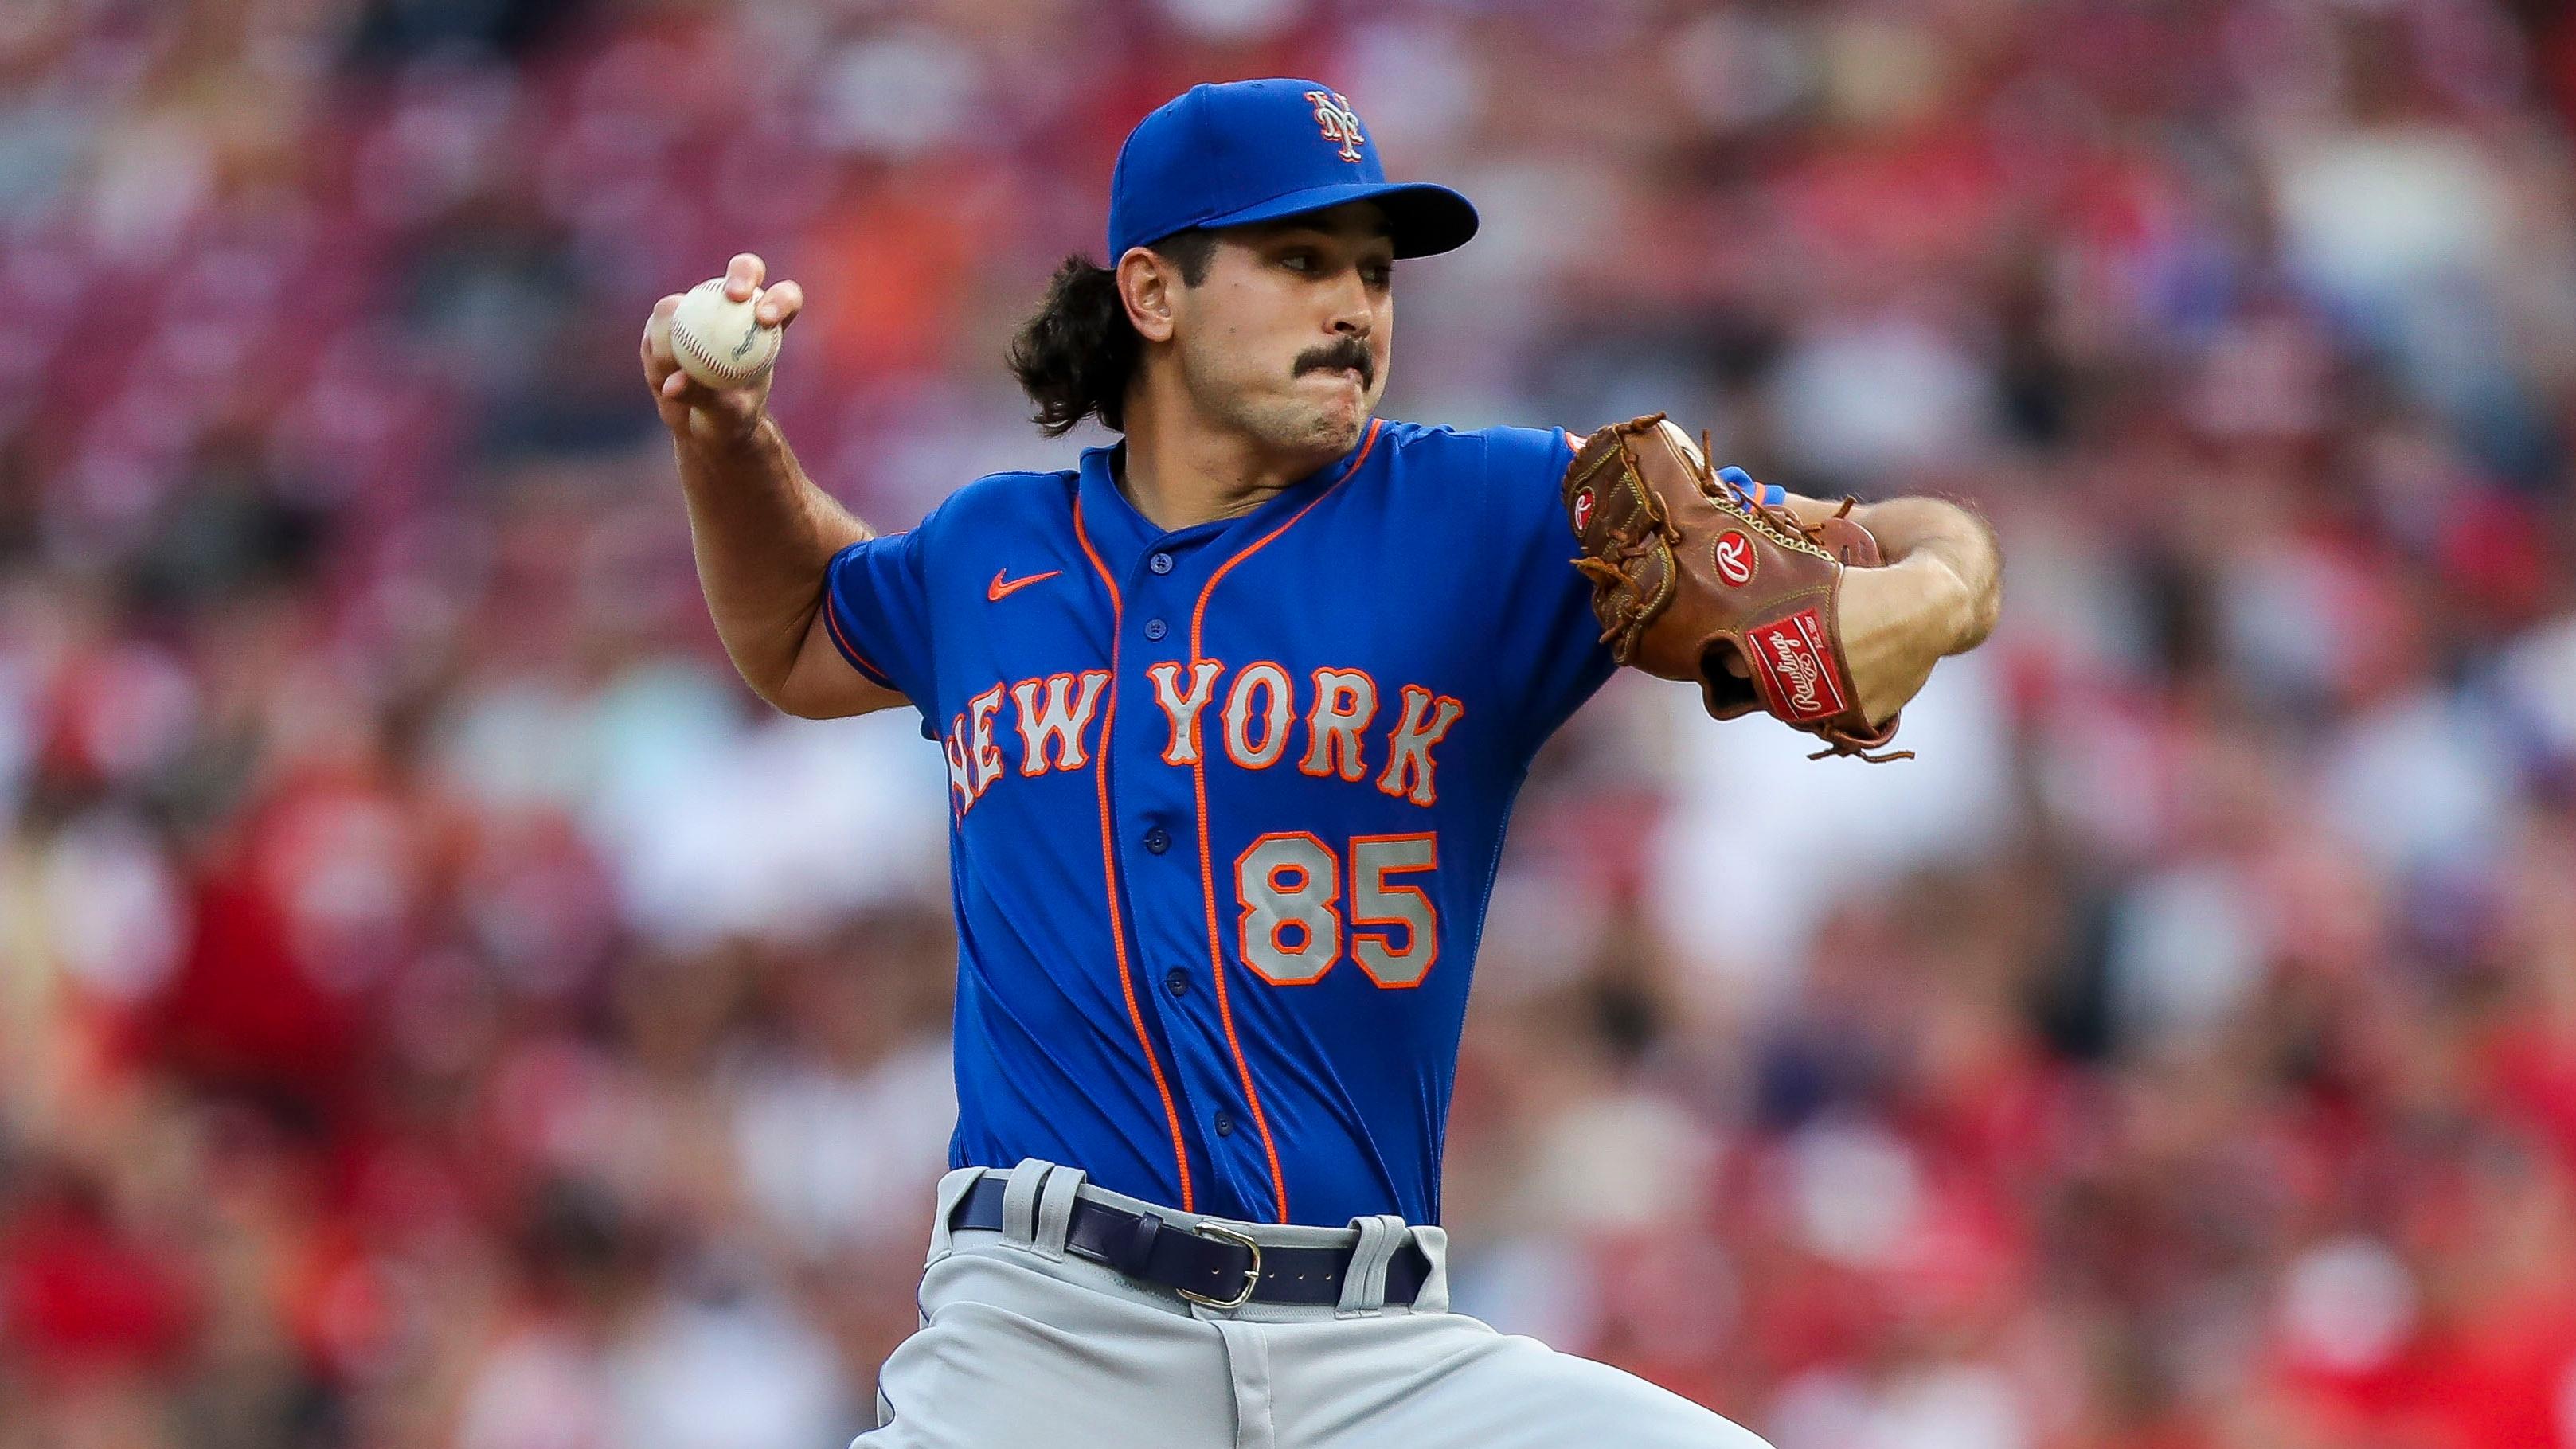 Jul 20, 2021; Cincinnati, Ohio, USA; New York Mets relief pitcher Stephen Nogosek (85) throws a pitch against the Cincinnati Reds in the second inning at Great American Ball Park. Mandatory Credit: Katie Stratman-USA TODAY Sports / Katie Stratman-USA TODAY Sports